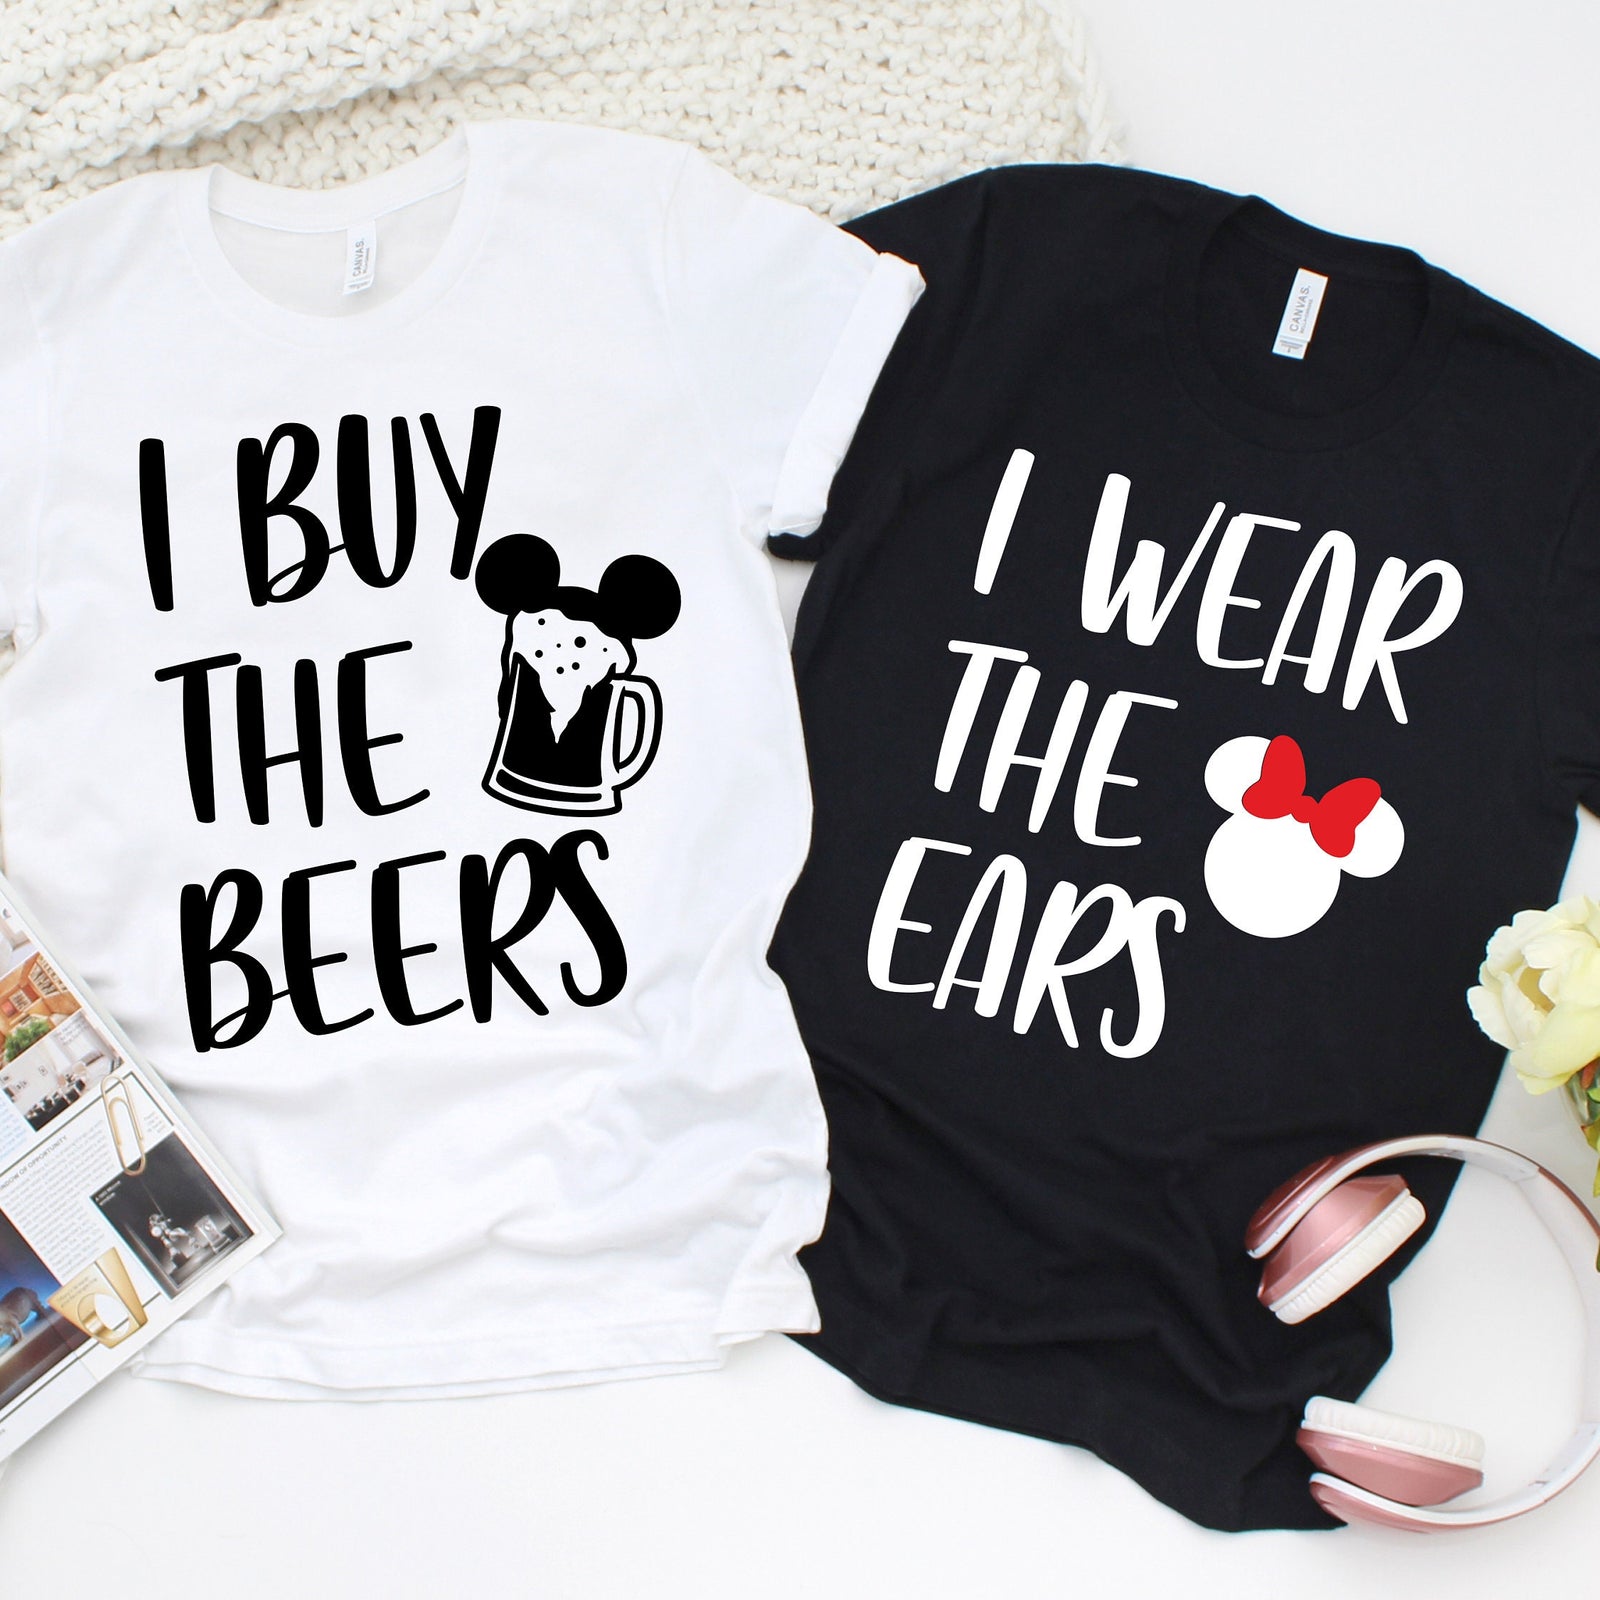 I wear the Ears - I Buy the Beers Matching Mickey and Minnie Shirts - Disney Couple T Shirt - Disney Fan Shirt